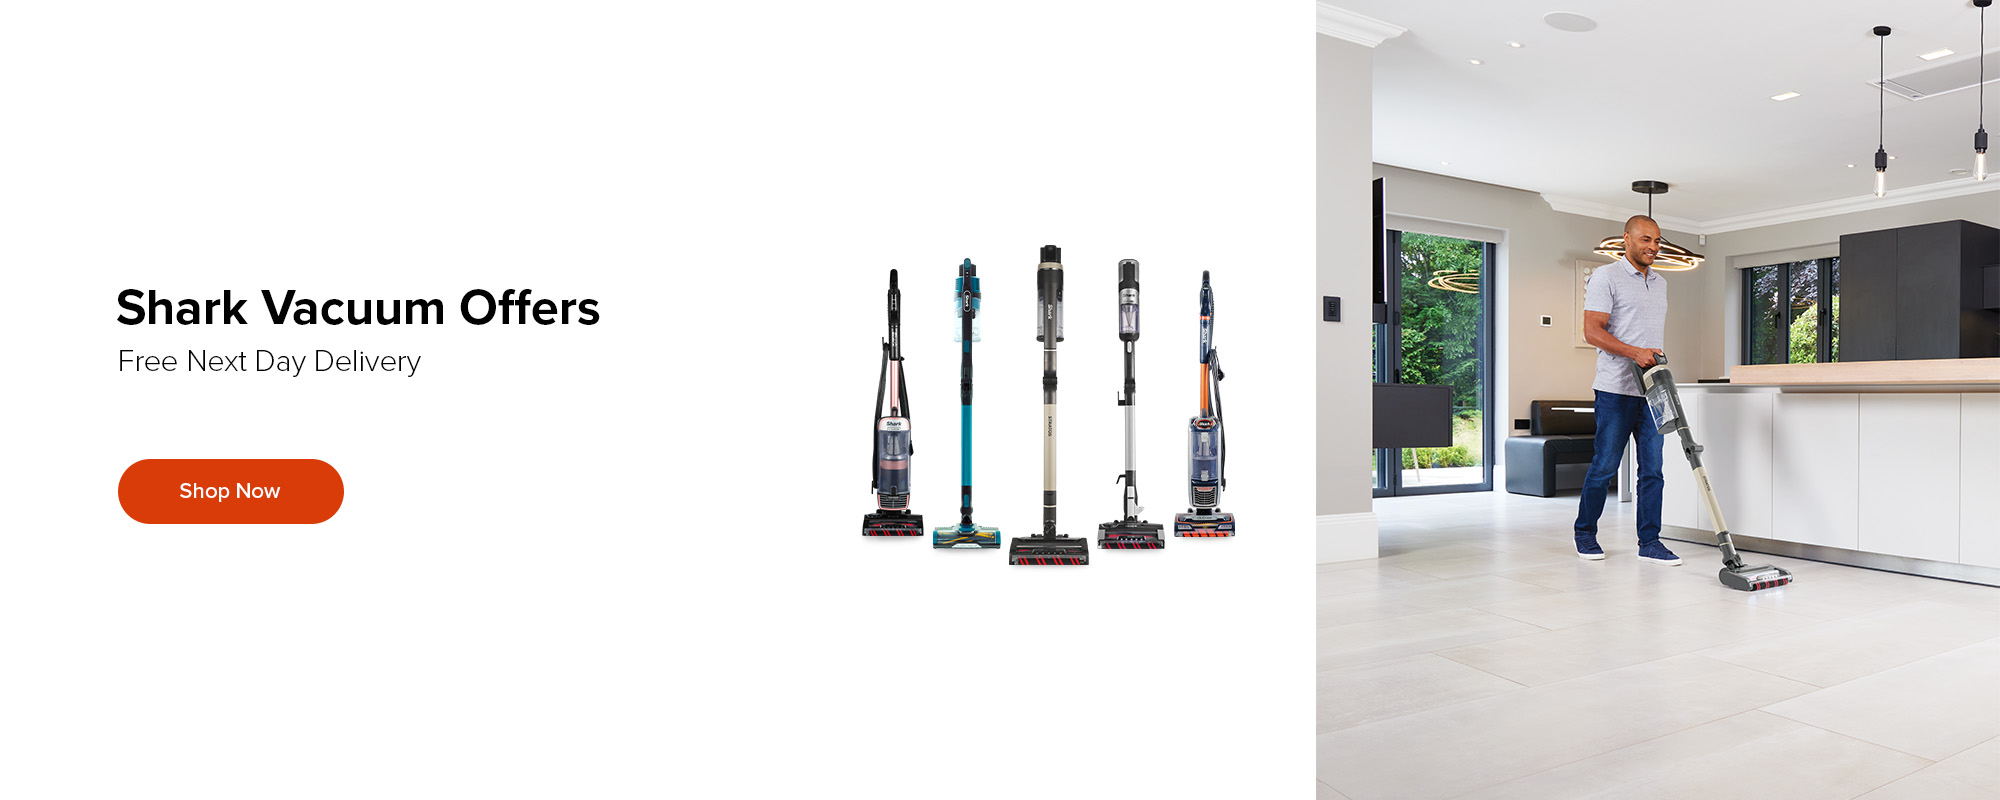 Save up to £110 with the latest offers on Shark Vacuum Cleaners